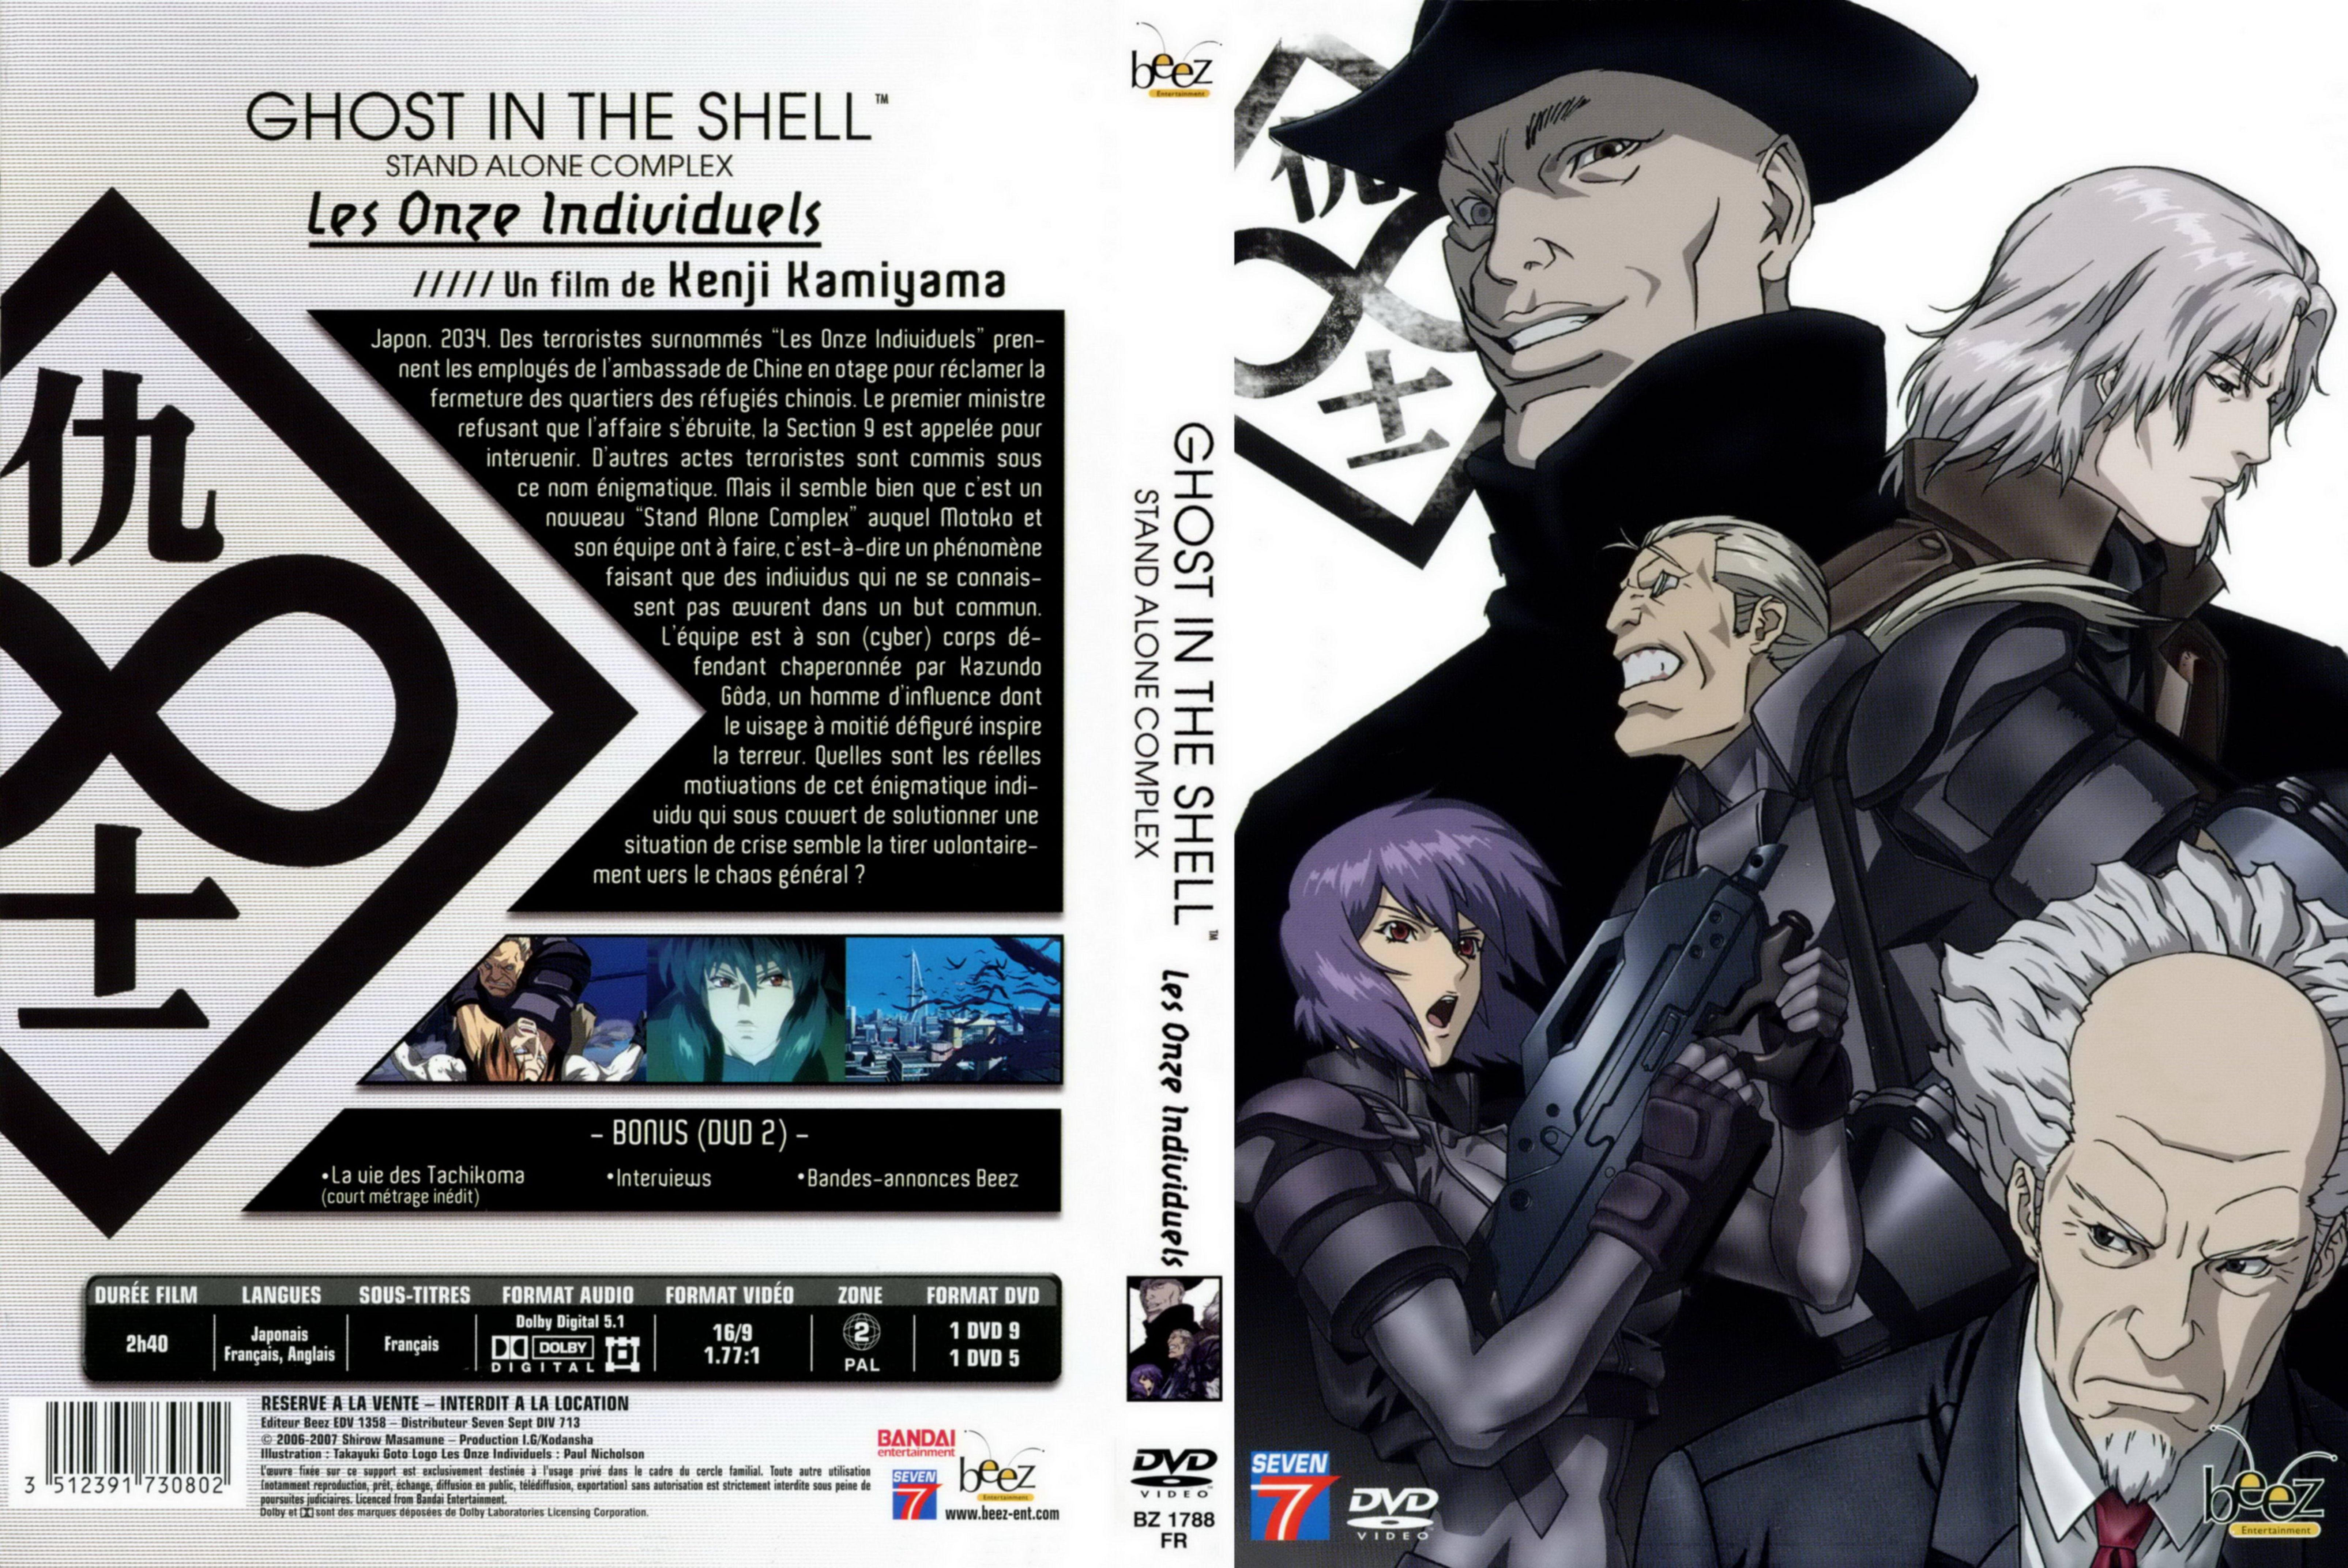 Jaquette DVD Ghost in the shell - stand alone complex Les onze individuels